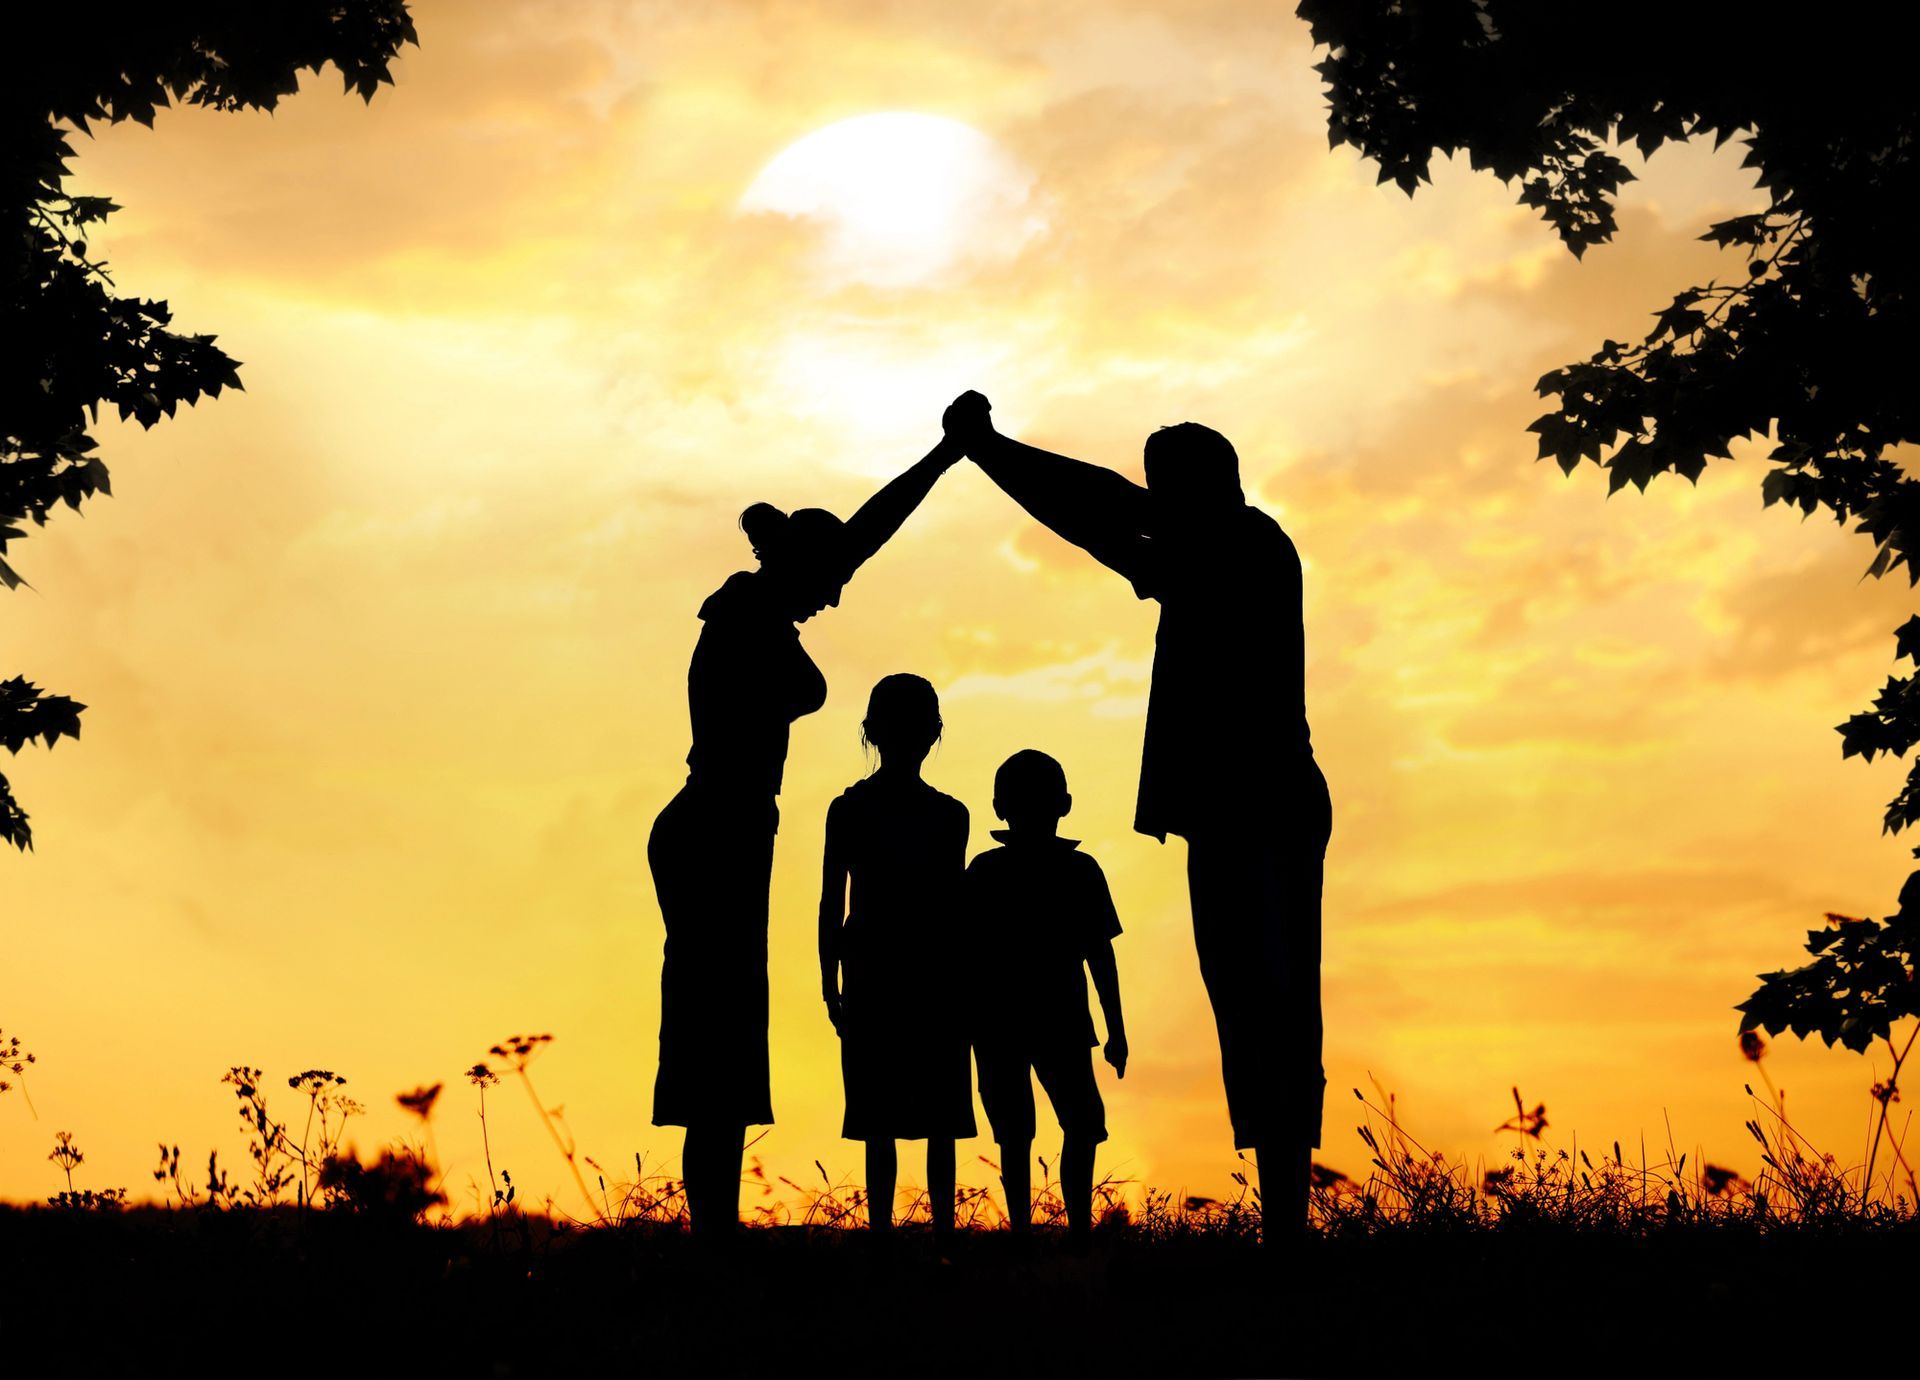 A silhouette of a family giving each other a high five